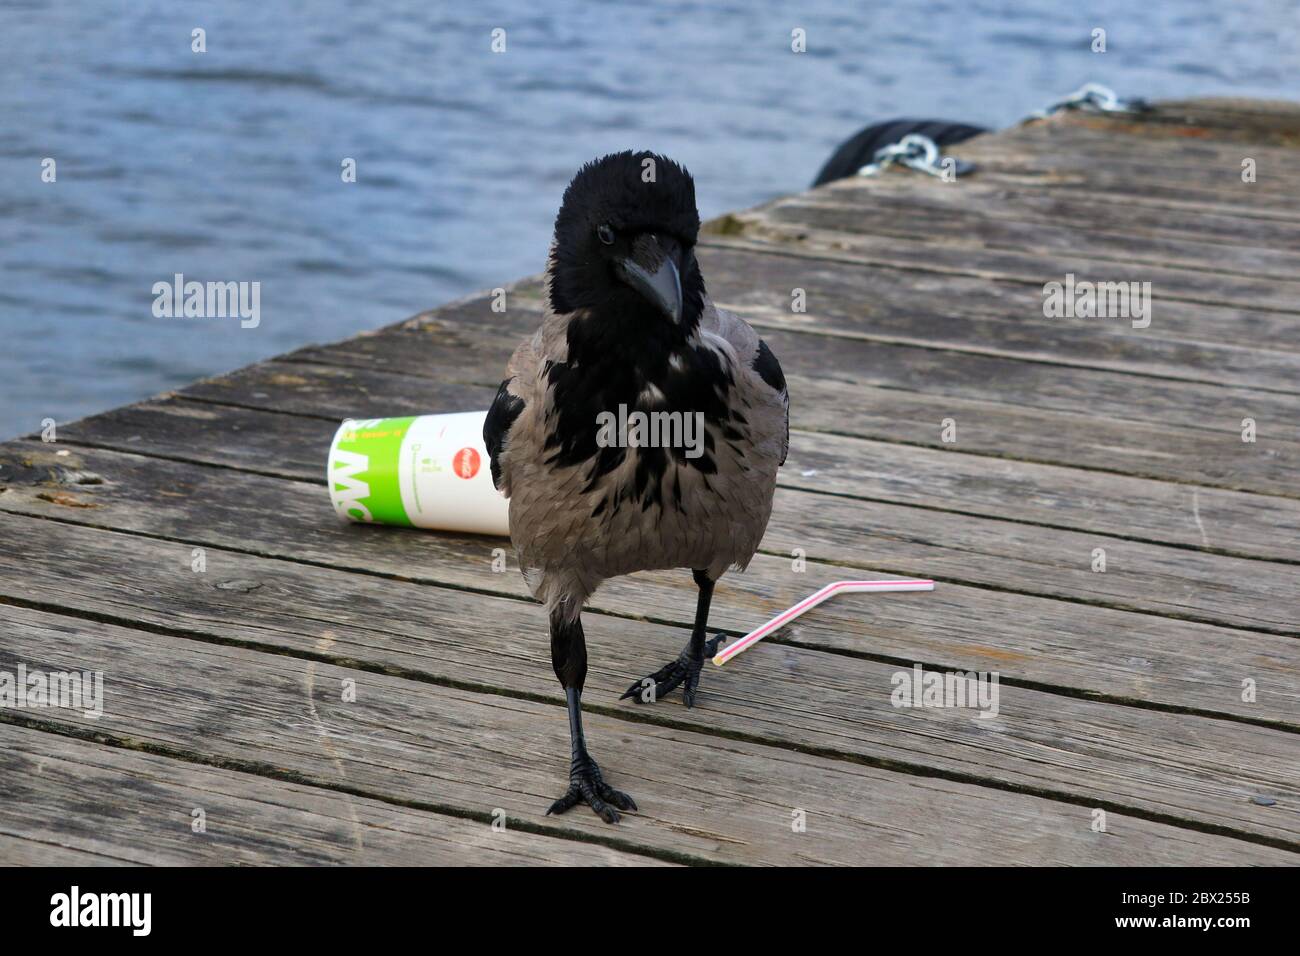 Hooded crow, corvus cornix, decides to leave McDonalds soft drink container behind and opts for food that's healthier for crows. Stock Photo